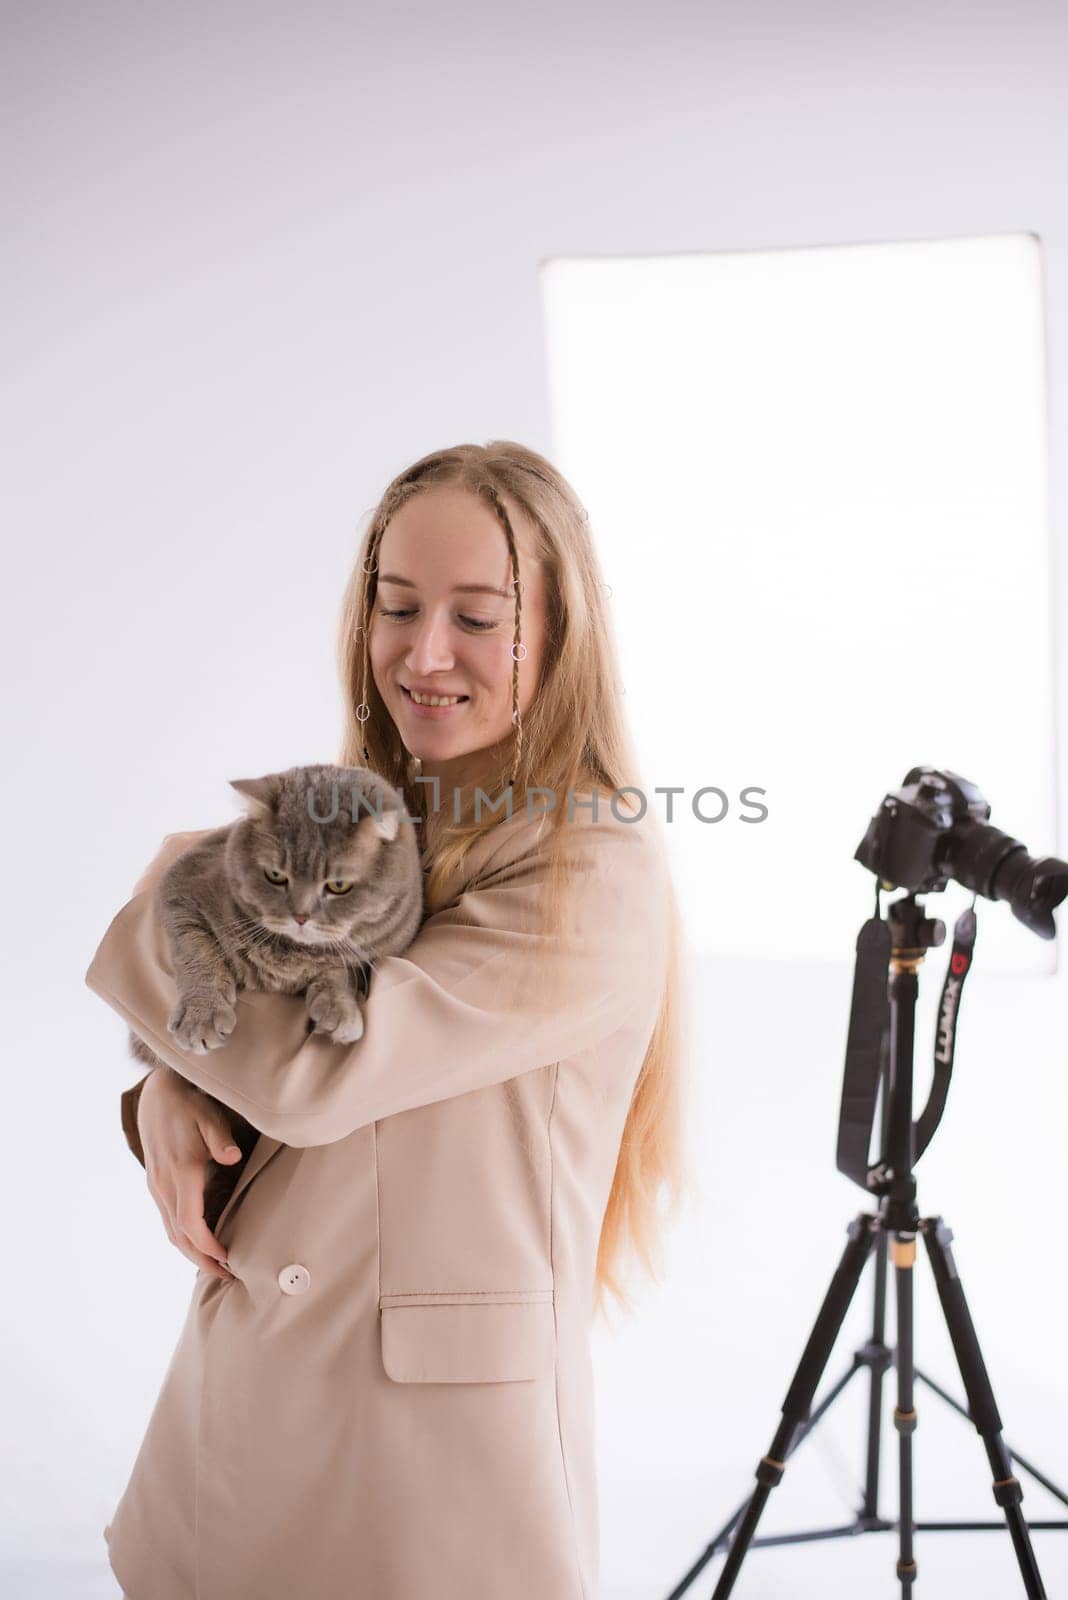 Woman photographer working with cat in photostudio by OksanaFedorchuk